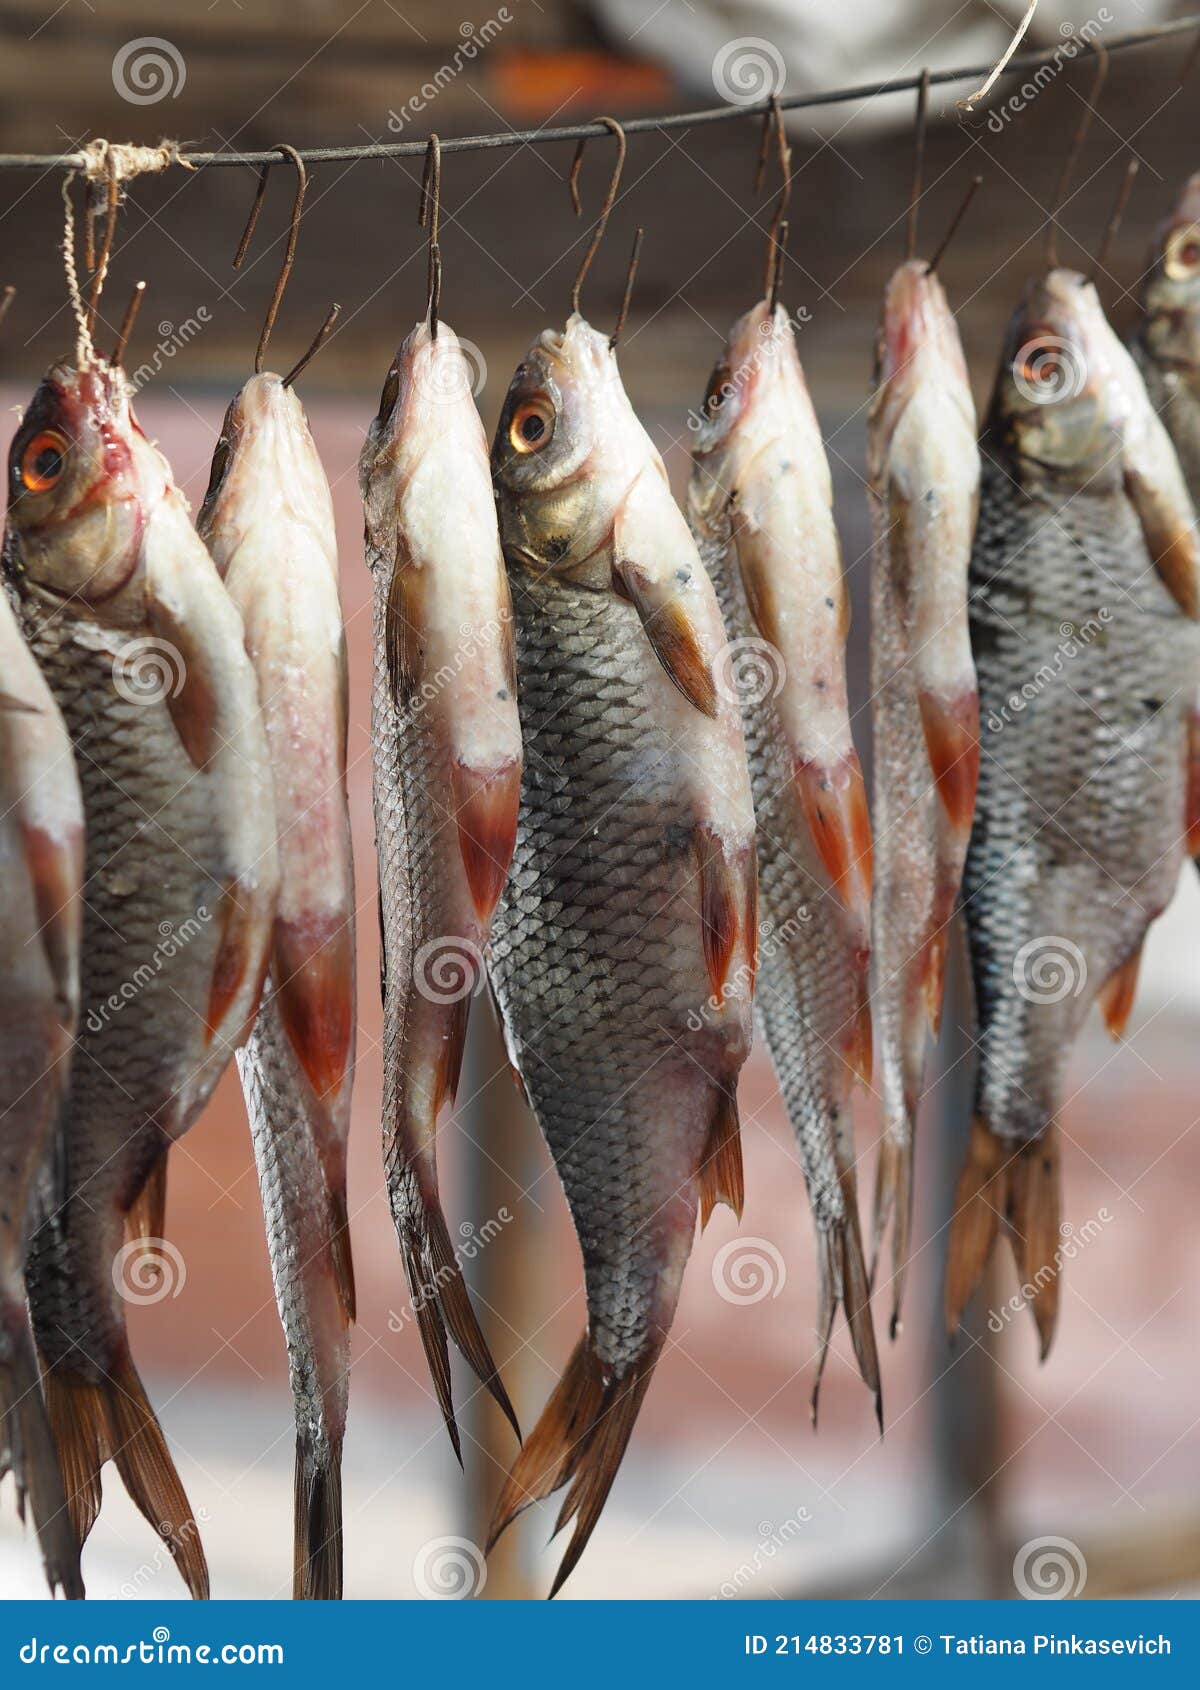 River Fish Caught in Winter Fishing Hang on Hooks on a Wire and